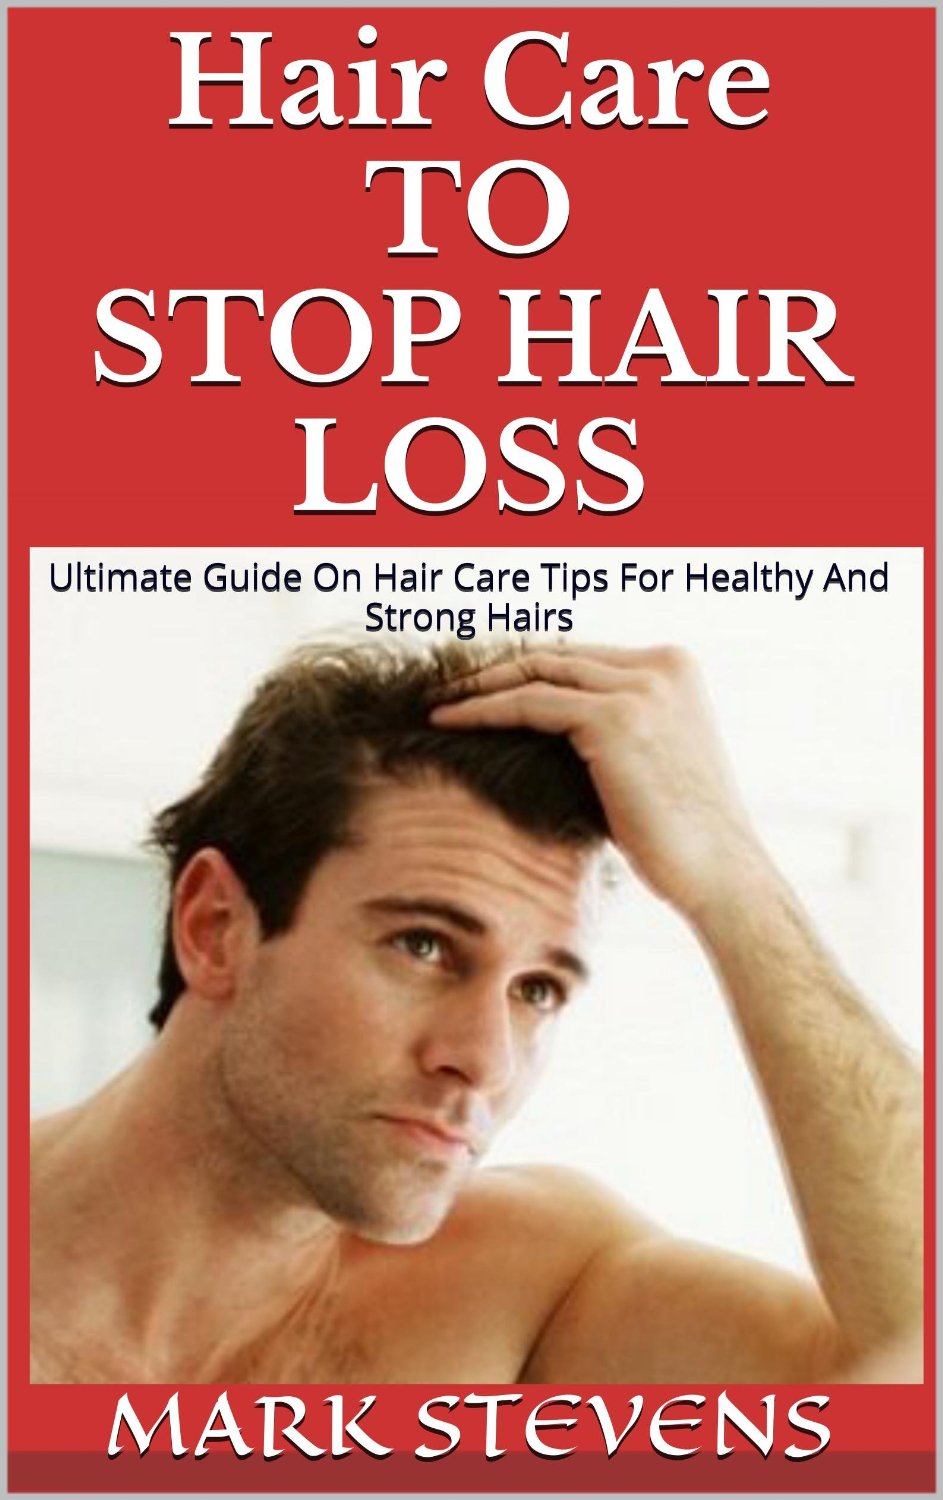 Hair Care To Stop Hair Loss by Mark Stevens